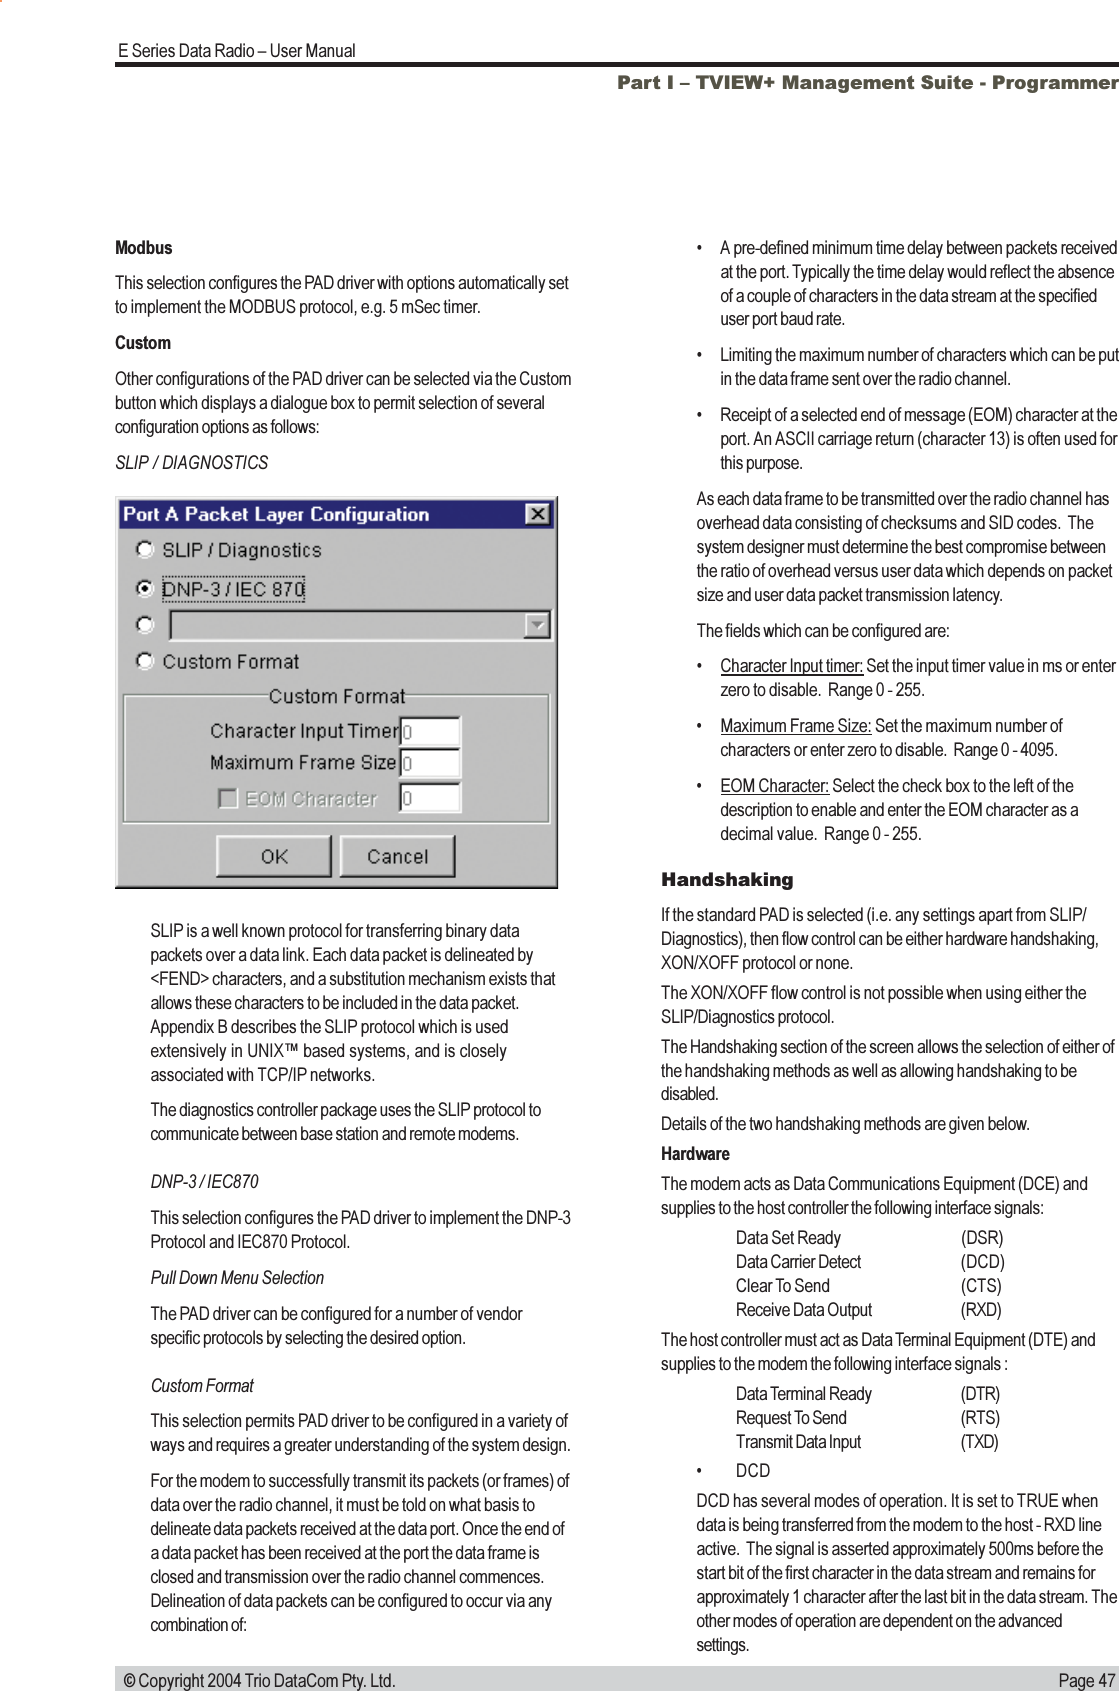 Page 47E Series Data Radio  User Manual © Copyright 2004 Trio DataCom Pty. Ltd.ModbusThis selection configures the PAD driver with options automatically setto implement the MODBUS protocol, e.g. 5 mSec timer.CustomOther configurations of the PAD driver can be selected via the Custombutton which displays a dialogue box to permit selection of severalconfiguration options as follows:SLIP / DIAGNOSTICSHandshakingIf the standard PAD is selected (i.e. any settings apart from SLIP/Diagnostics), then flow control can be either hardware handshaking,XON/XOFF protocol or none.The XON/XOFF flow control is not possible when using either theSLIP/Diagnostics protocol.The Handshaking section of the screen allows the selection of either ofthe handshaking methods as well as allowing handshaking to bedisabled.Details of the two handshaking methods are given below.HardwareThe modem acts as Data Communications Equipment (DCE) andsupplies to the host controller the following interface signals:Data Set Ready (DSR)Data Carrier Detect (DCD)Clear To Send (CTS)Receive Data Output (RXD)The host controller must act as Data Terminal Equipment (DTE) andsupplies to the modem the following interface signals :Data Terminal Ready (DTR)Request To Send (RTS)Transmit Data Input (TXD) DCDDCD has several modes of operation. It is set to TRUE whendata is being transferred from the modem to the host - RXD lineactive.  The signal is asserted approximately 500ms before thestart bit of the first character in the data stream and remains forapproximately 1 character after the last bit in the data stream. Theother modes of operation are dependent on the advancedsettings.Part I  TVIEW+ Management Suite - ProgrammerSLIP is a well known protocol for transferring binary datapackets over a data link. Each data packet is delineated by&lt;FEND&gt; characters, and a substitution mechanism exists thatallows these characters to be included in the data packet.Appendix B describes the SLIP protocol which is usedextensively in UNIX based systems, and is closelyassociated with TCP/IP networks.The diagnostics controller package uses the SLIP protocol tocommunicate between base station and remote modems.DNP-3 / IEC870This selection configures the PAD driver to implement the DNP-3Protocol and IEC870 Protocol.Pull Down Menu SelectionThe PAD driver can be configured for a number of vendorspecific protocols by selecting the desired option.Custom FormatThis selection permits PAD driver to be configured in a variety ofways and requires a greater understanding of the system design.For the modem to successfully transmit its packets (or frames) ofdata over the radio channel, it must be told on what basis todelineate data packets received at the data port. Once the end ofa data packet has been received at the port the data frame isclosed and transmission over the radio channel commences.Delineation of data packets can be configured to occur via anycombination of: A pre-defined minimum time delay between packets receivedat the port. Typically the time delay would reflect the absenceof a couple of characters in the data stream at the specifieduser port baud rate. Limiting the maximum number of characters which can be putin the data frame sent over the radio channel. Receipt of a selected end of message (EOM) character at theport. An ASCII carriage return (character 13) is often used forthis purpose.As each data frame to be transmitted over the radio channel hasoverhead data consisting of checksums and SID codes.  Thesystem designer must determine the best compromise betweenthe ratio of overhead versus user data which depends on packetsize and user data packet transmission latency.The fields which can be configured are:Character Input timer: Set the input timer value in ms or enterzero to disable.  Range 0 - 255.Maximum Frame Size: Set the maximum number ofcharacters or enter zero to disable.  Range 0 - 4095.EOM Character: Select the check box to the left of thedescription to enable and enter the EOM character as adecimal value.  Range 0 - 255.